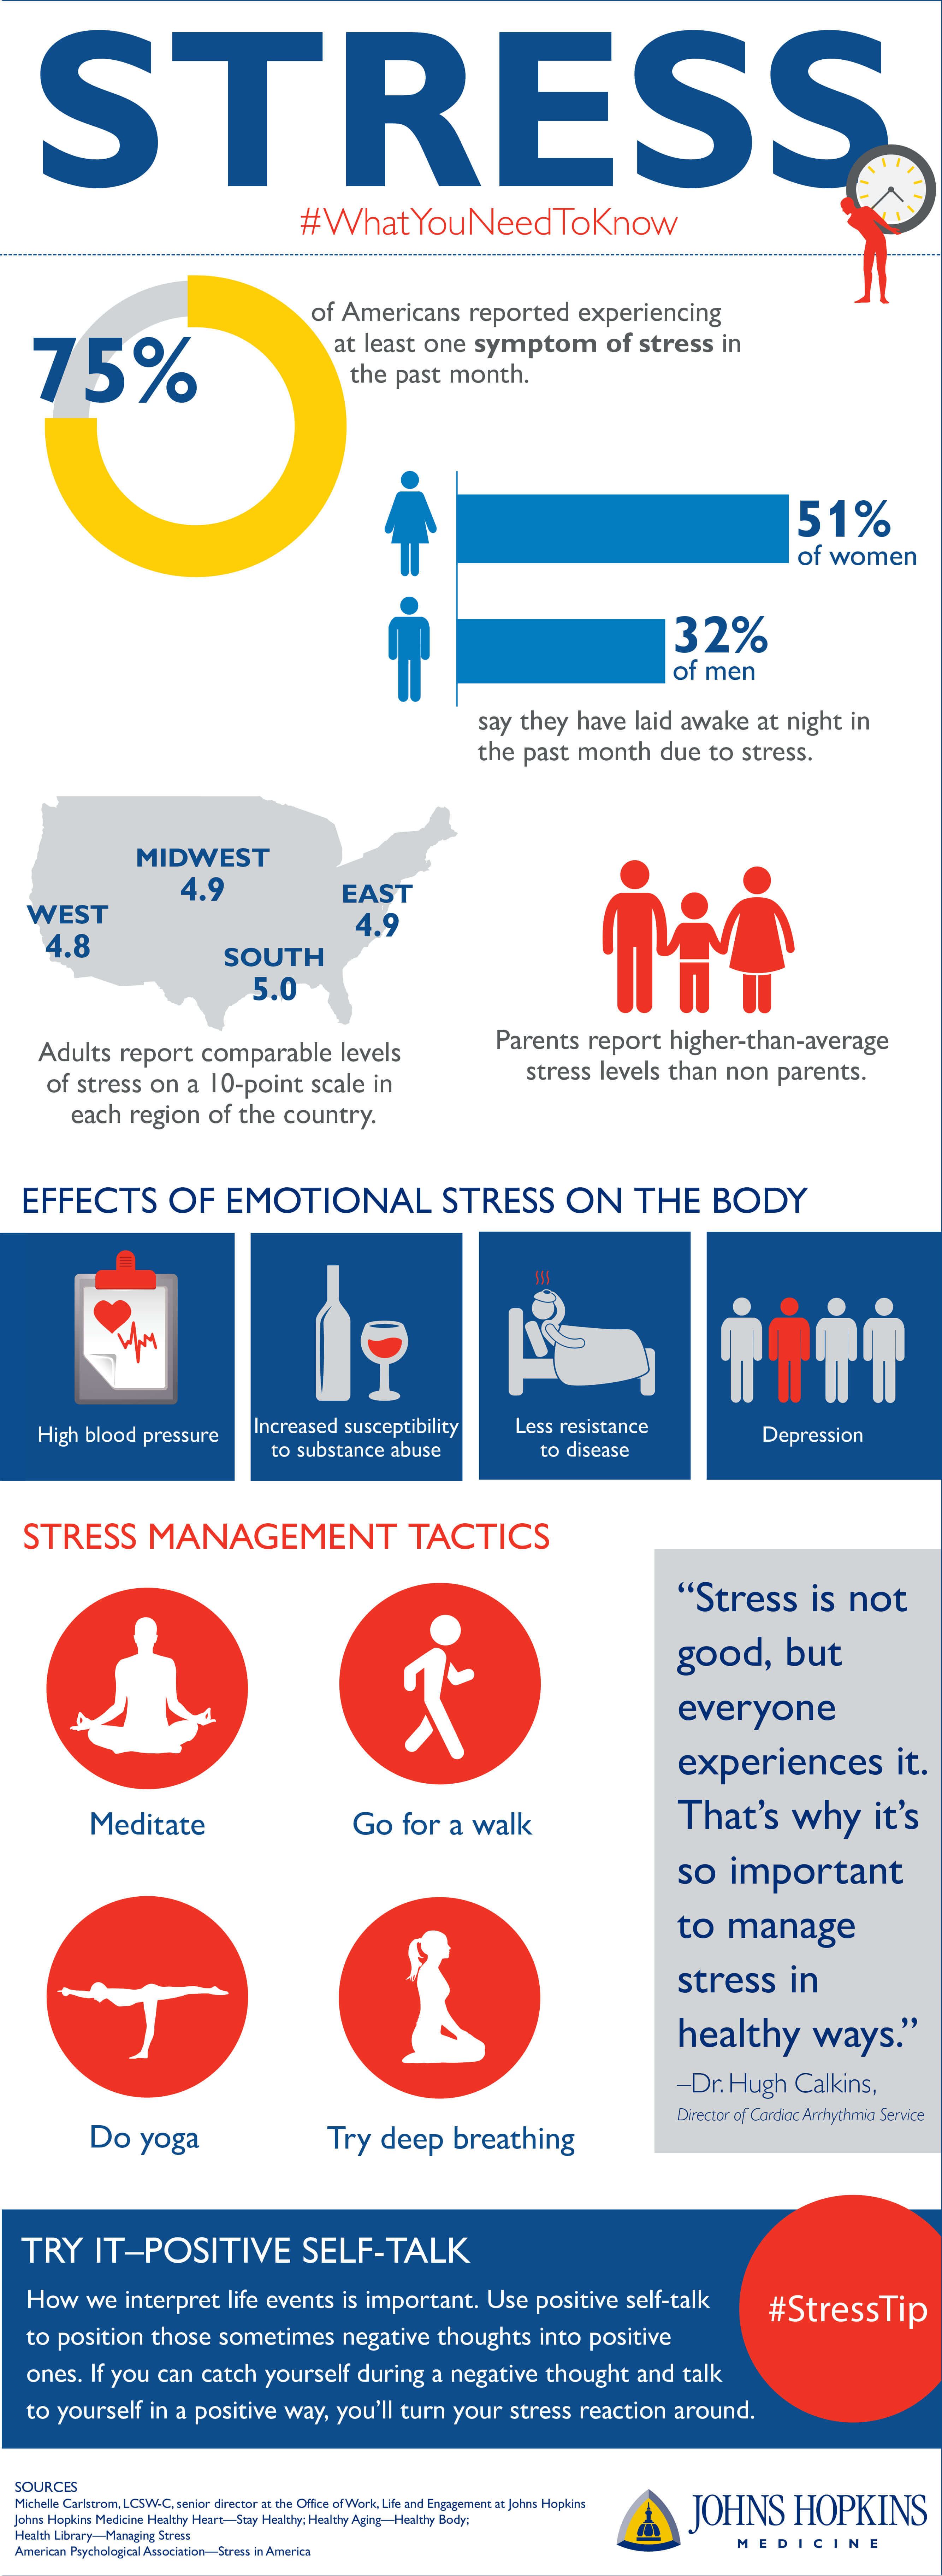 research on stress suggests that